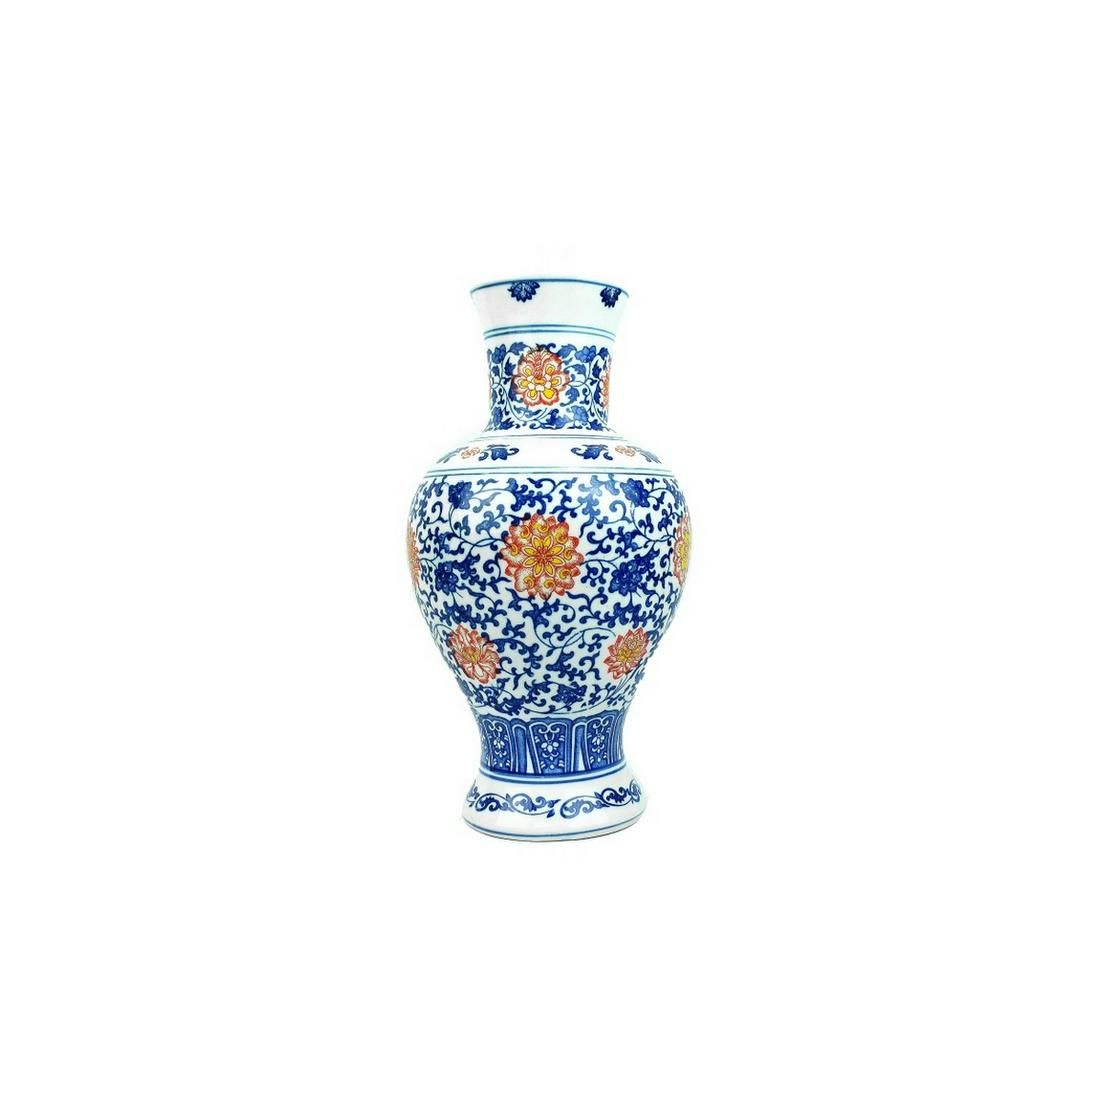 CHINESE DOUCAI STYLE VASELarge 3d261b